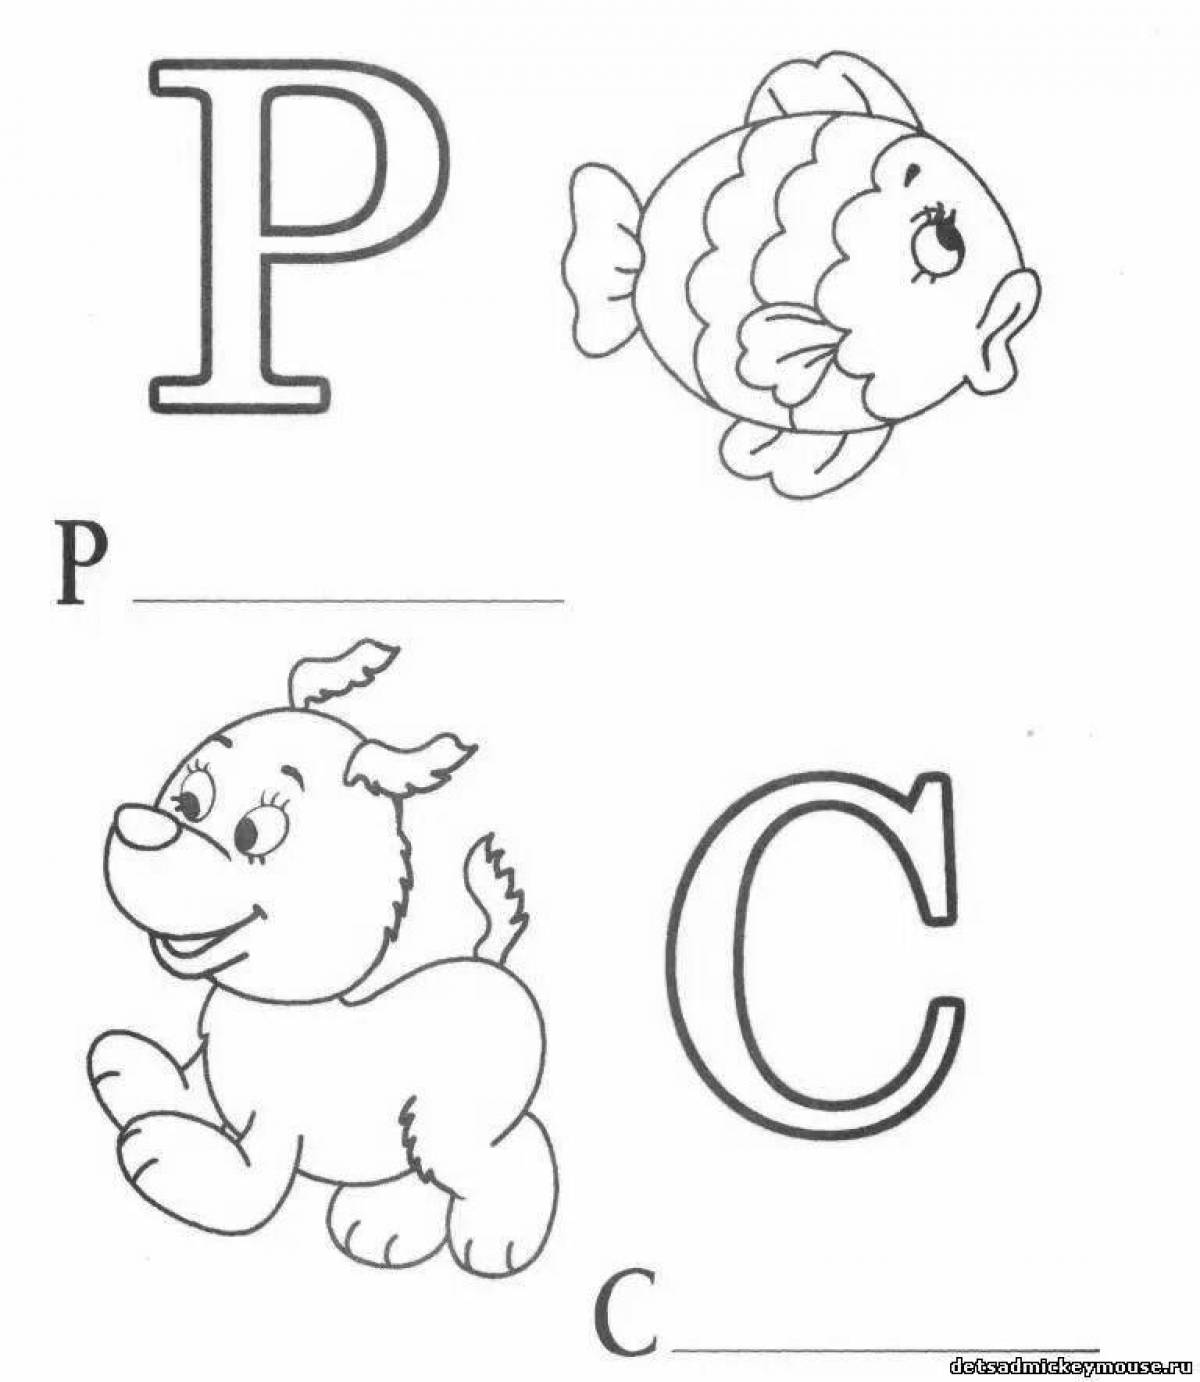 Colourful coloring with alphabet for children 3-4 years old